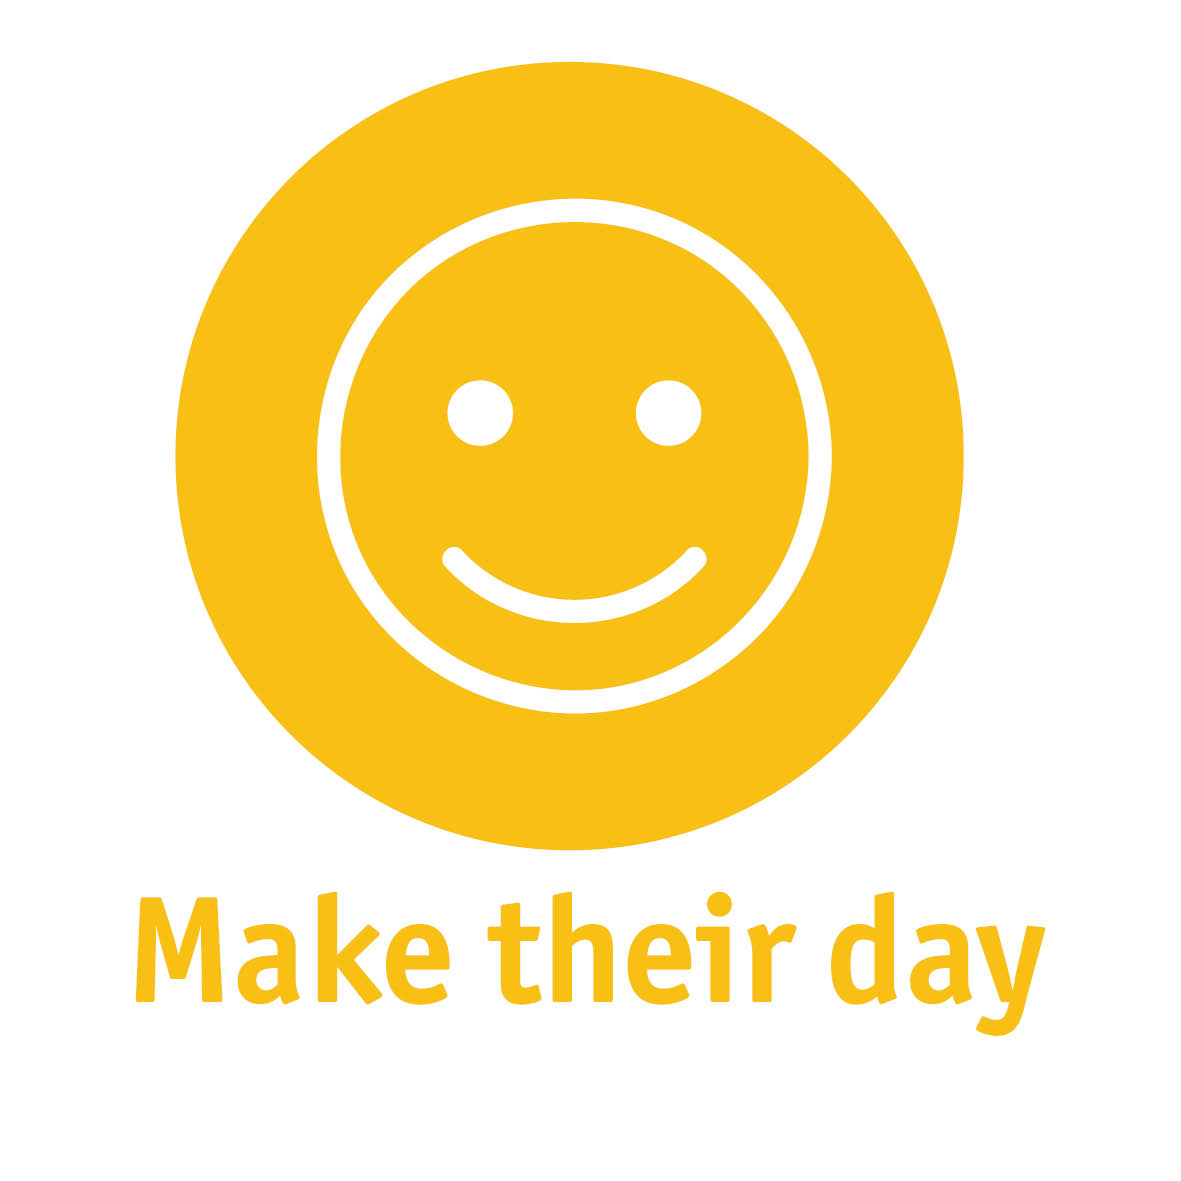 A yellow circle with a smiley face and the words make their day